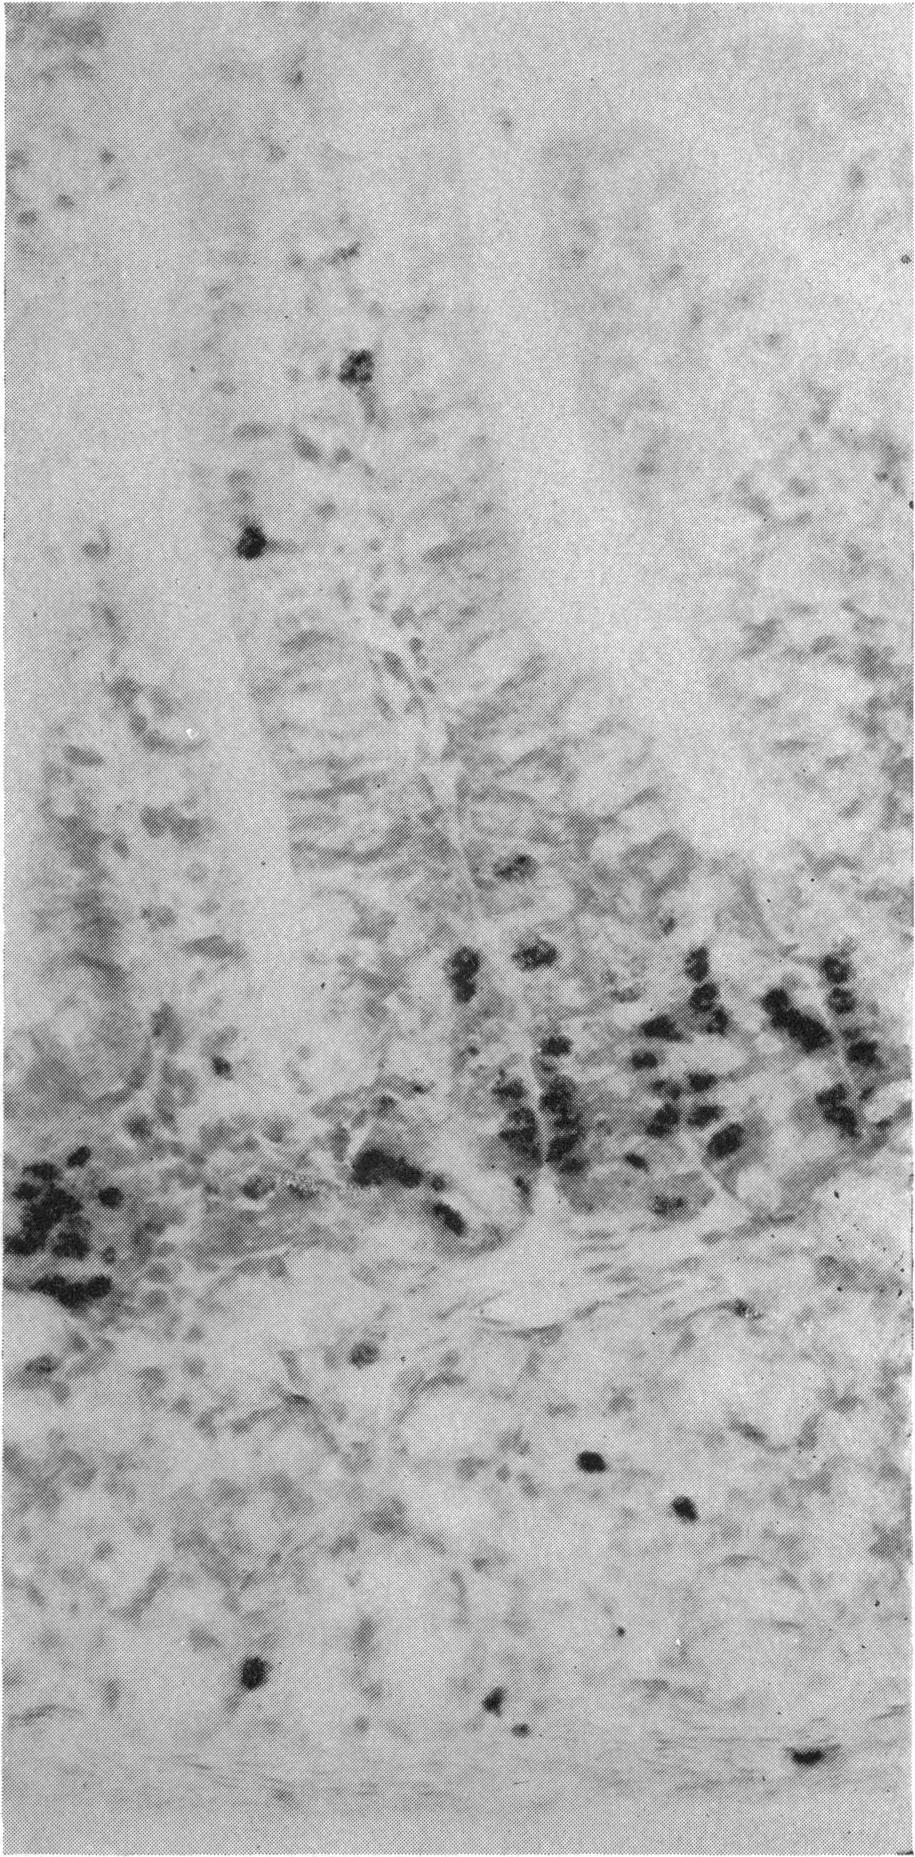 Duodenum showing labelled nuclei in cr.